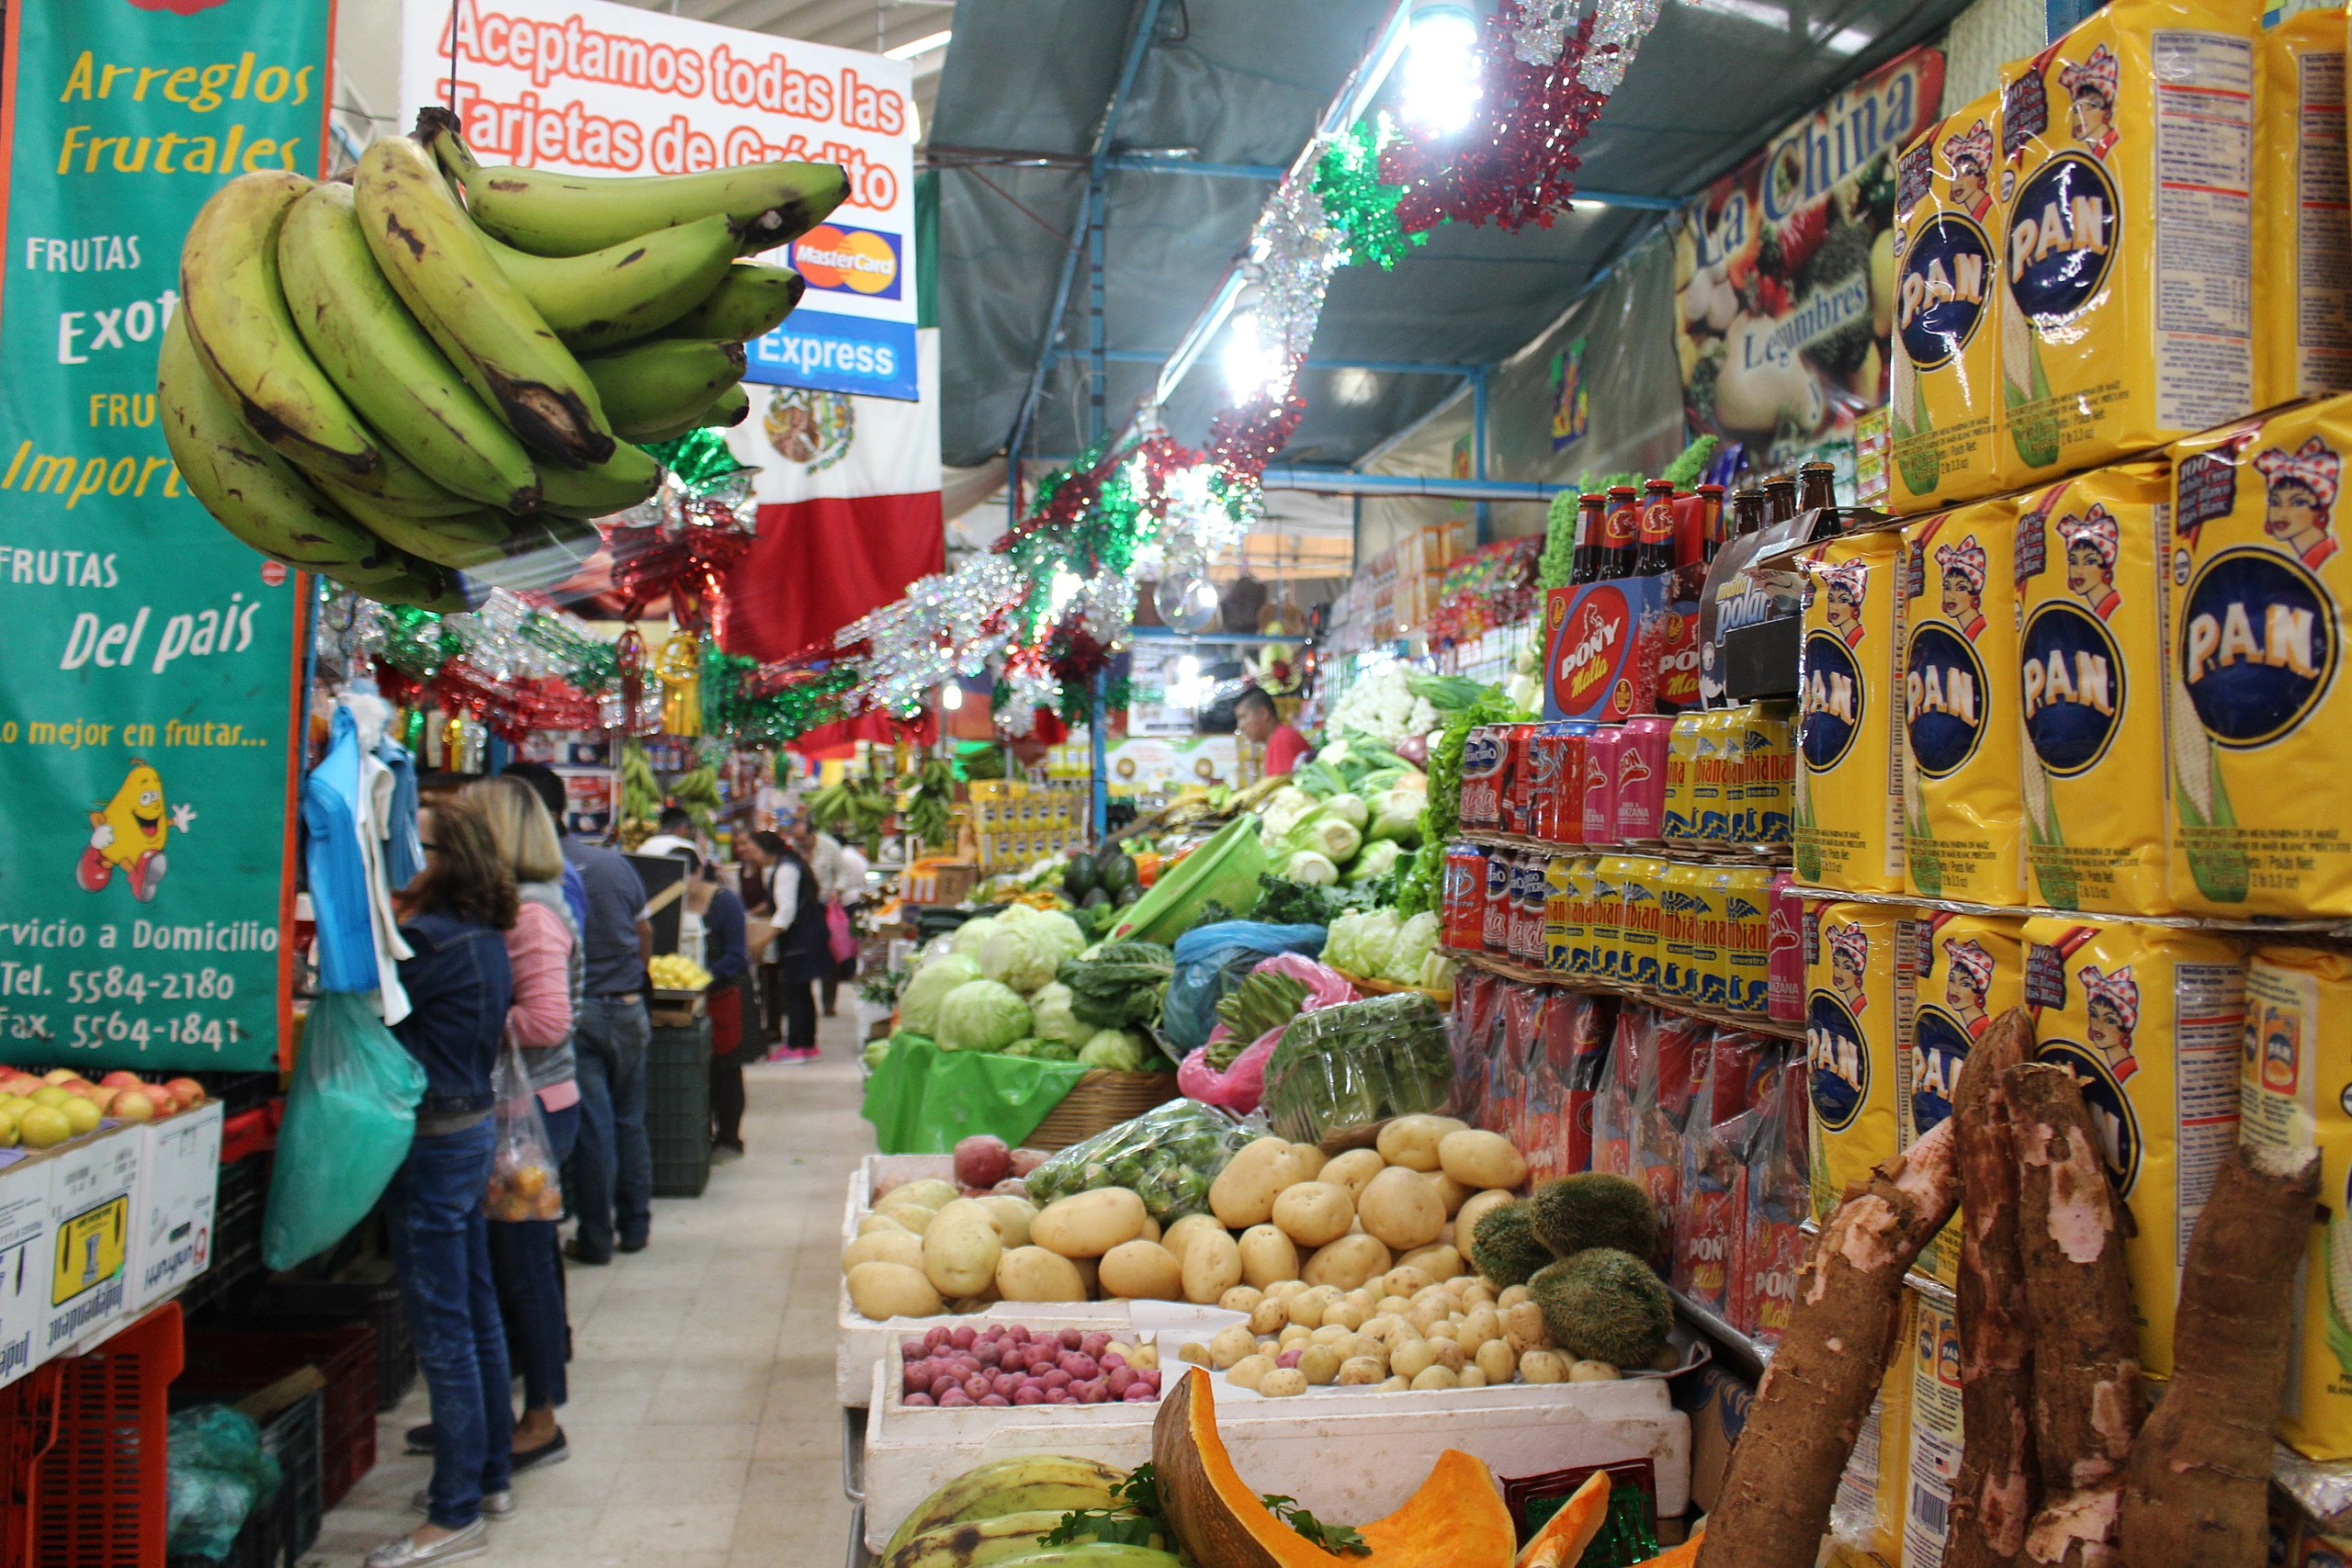 Some products and goods being sold in Mercado Medellín